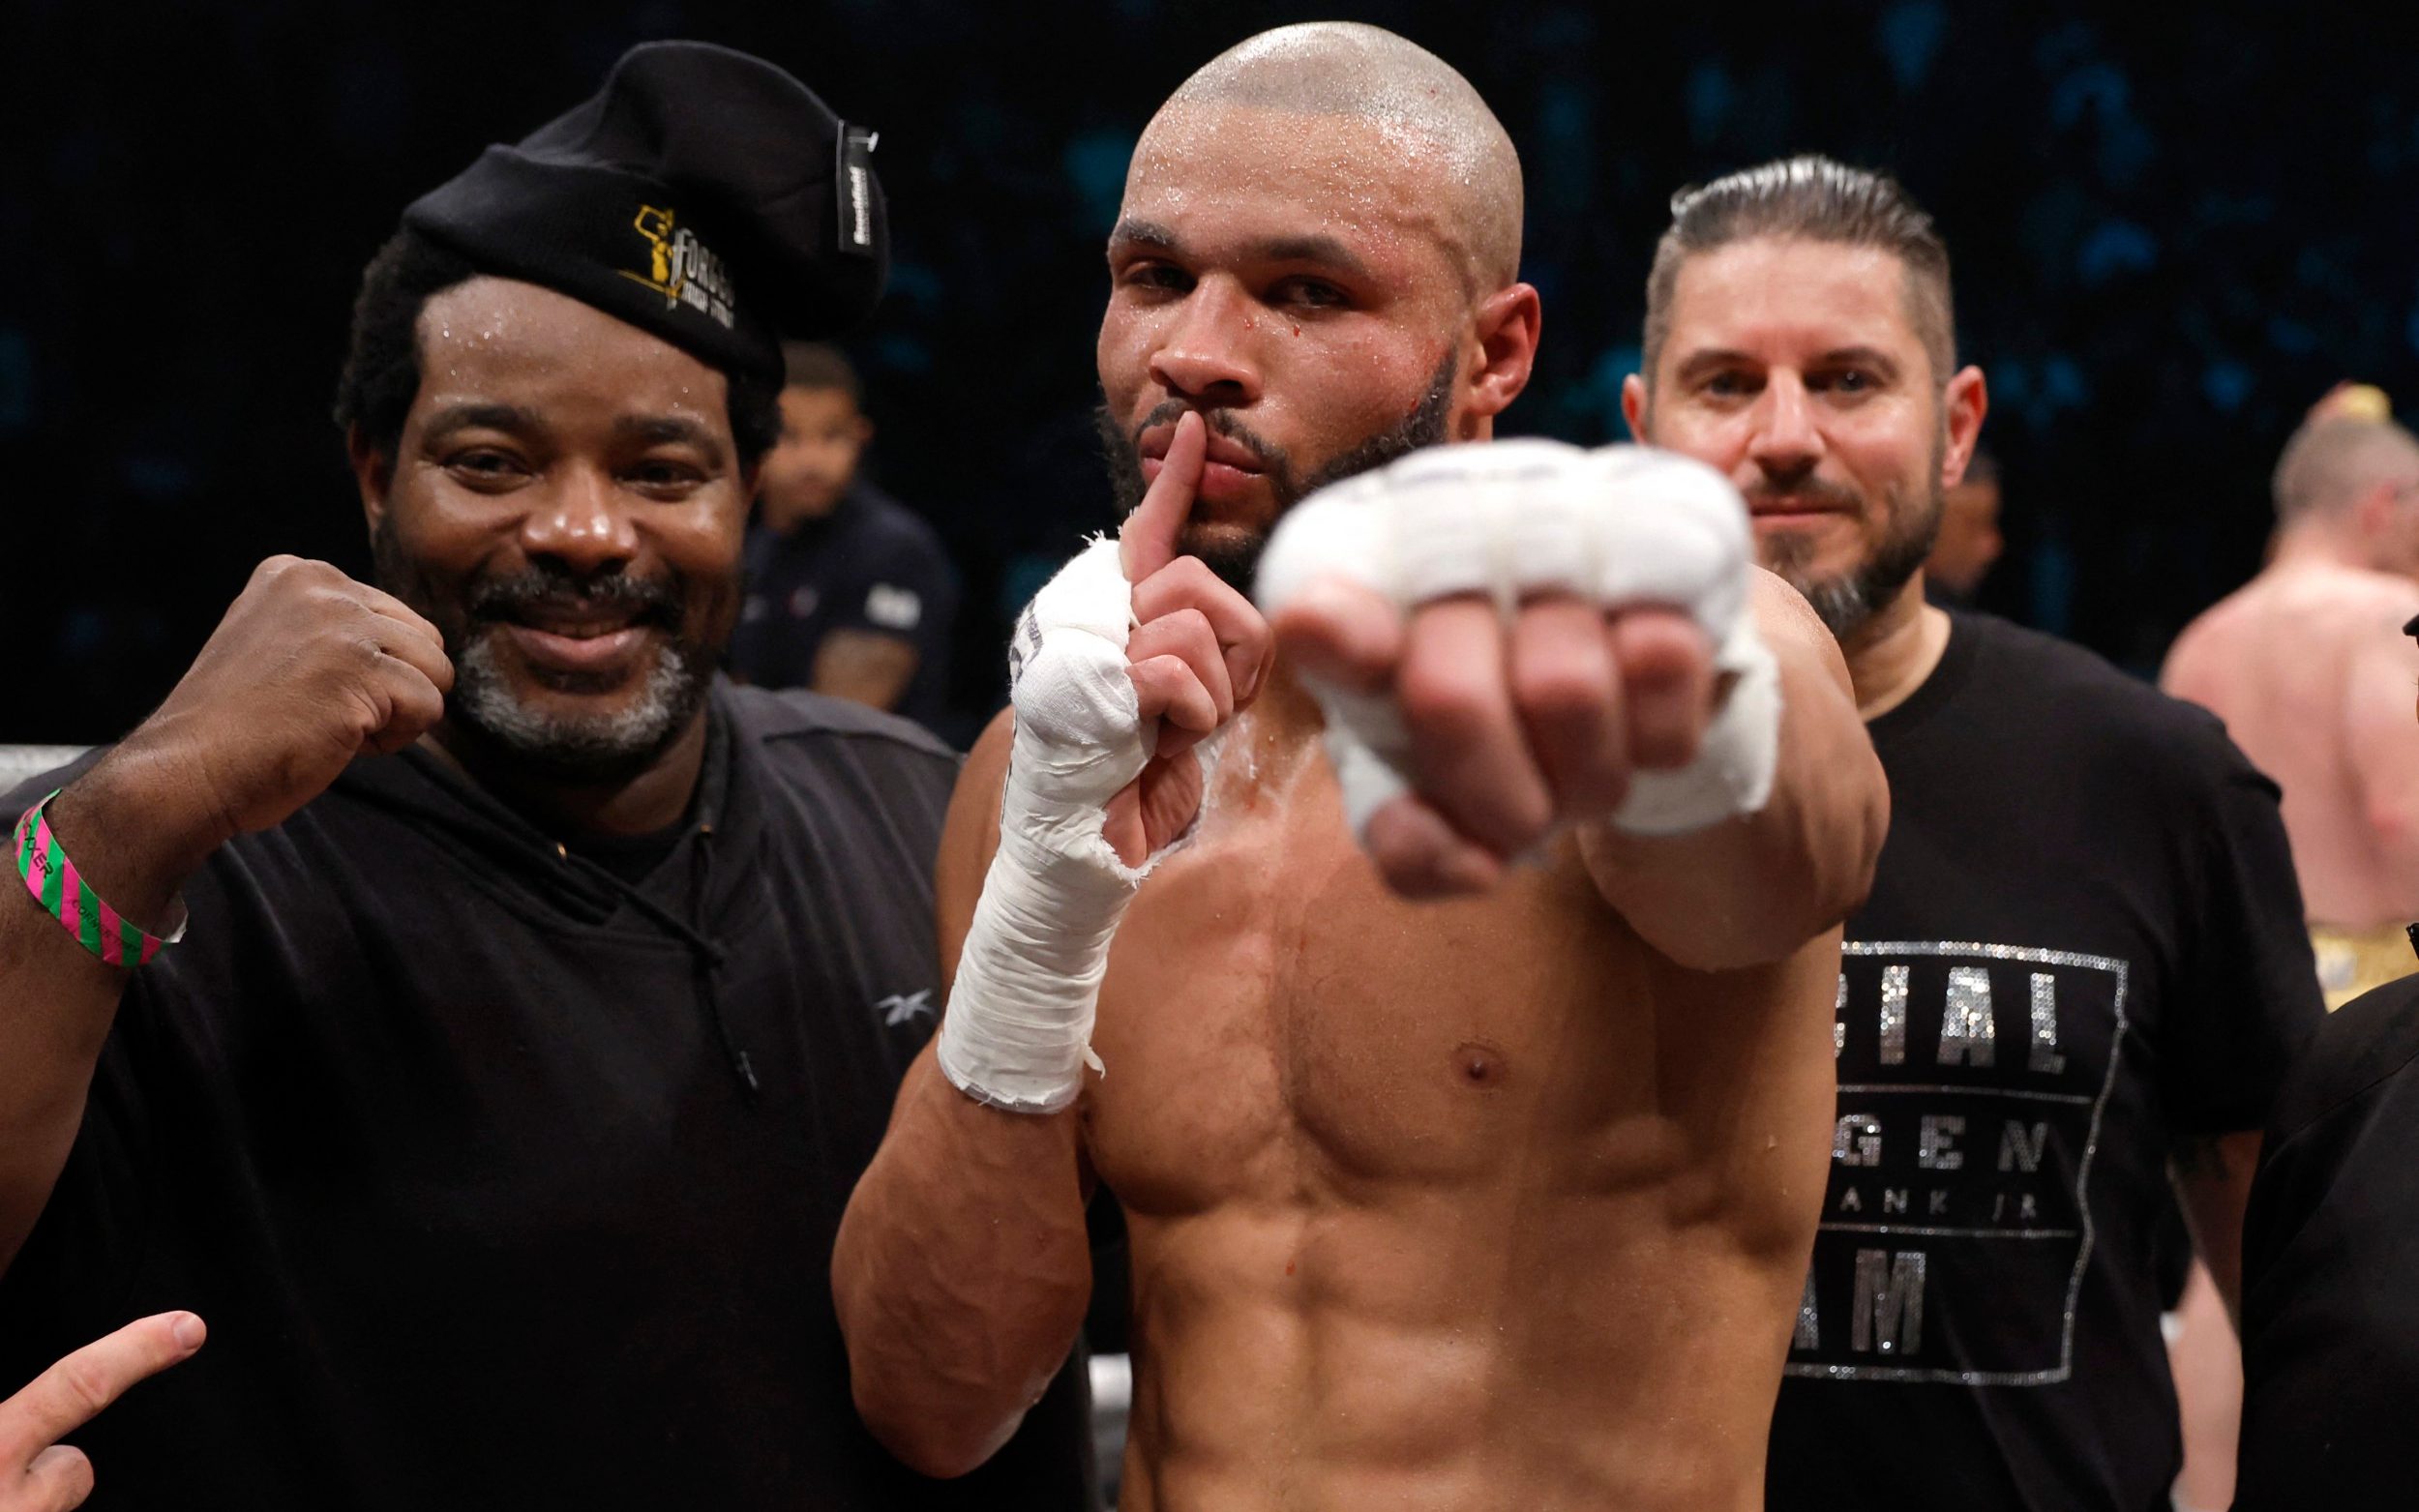 Chris Eubank Jr vows to support trainer McIntyre following arrest